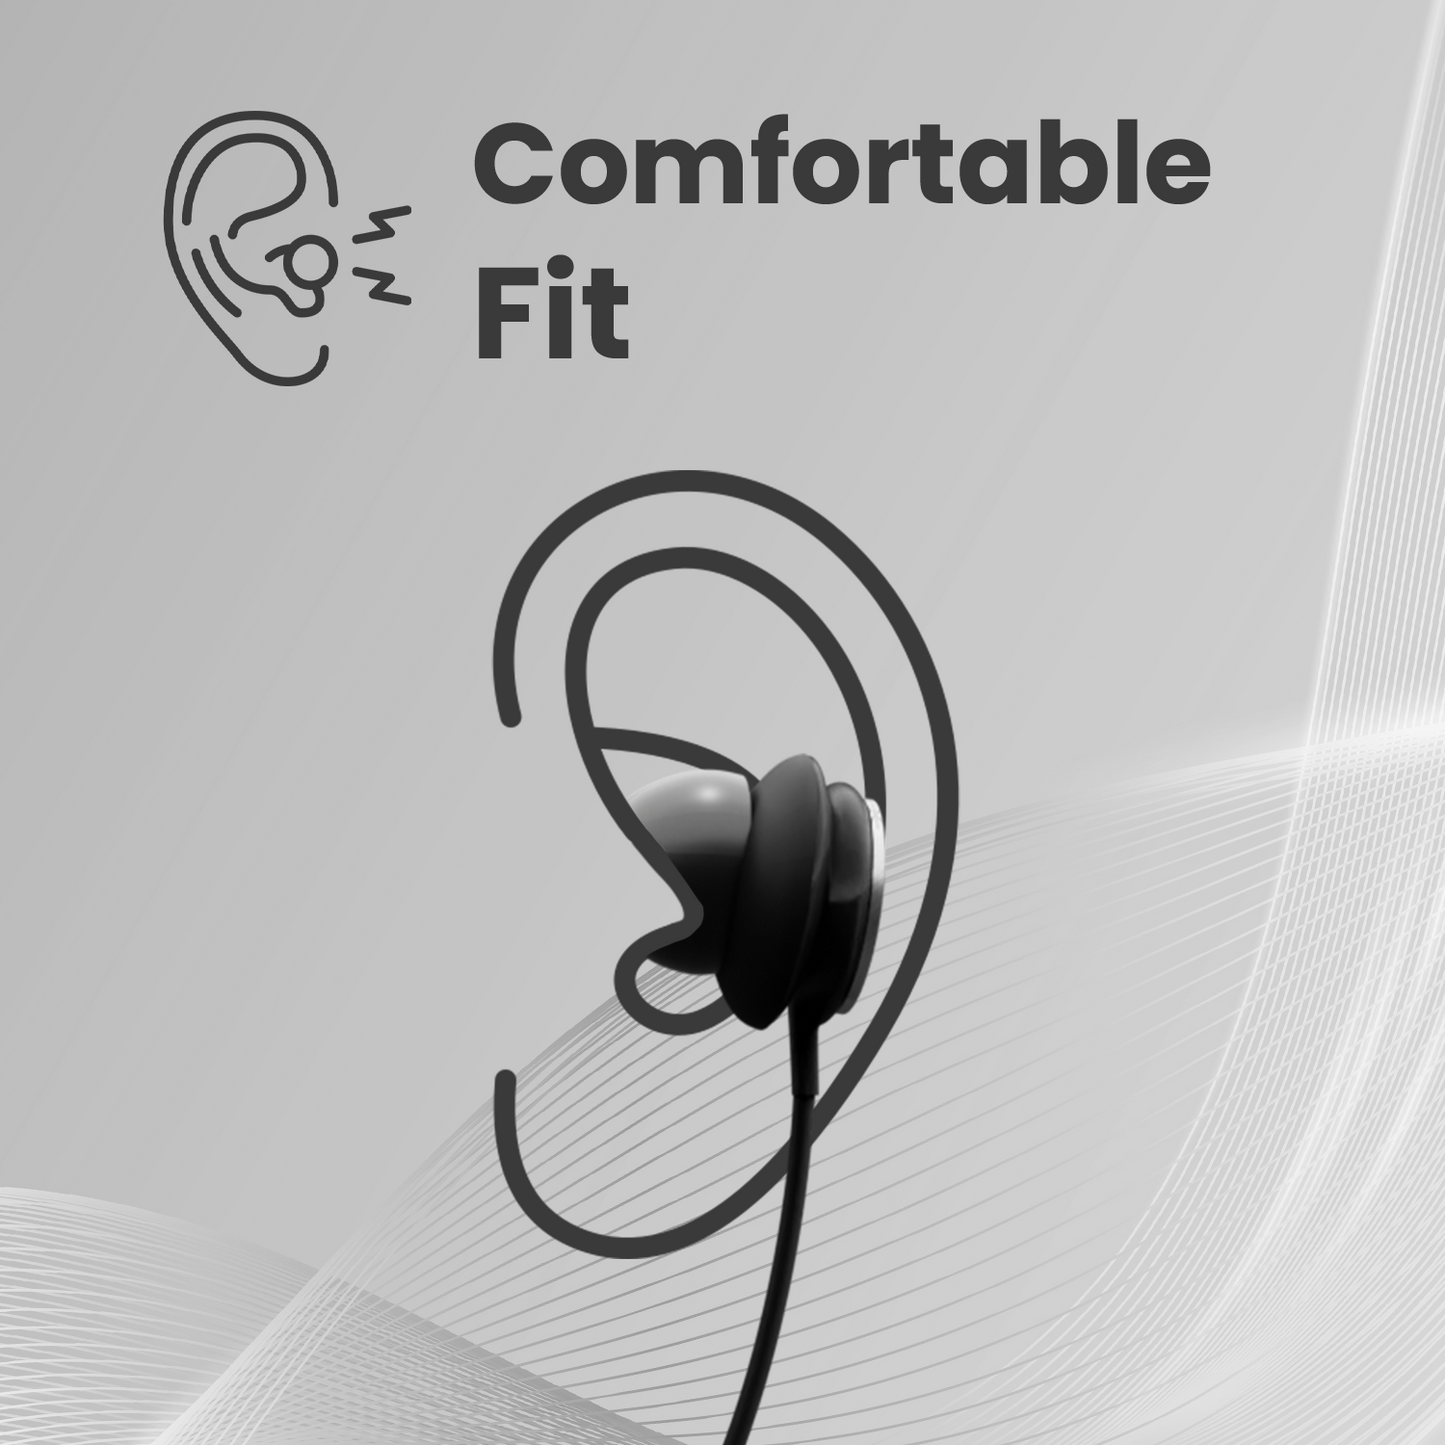 IAIR S8Max in-Ear Wired Earphone with Mic, 3.5mm Audio Jack, Enhanced bass with Dynamic Style, Soft Silivon Ear Tips Compatible with All Devices